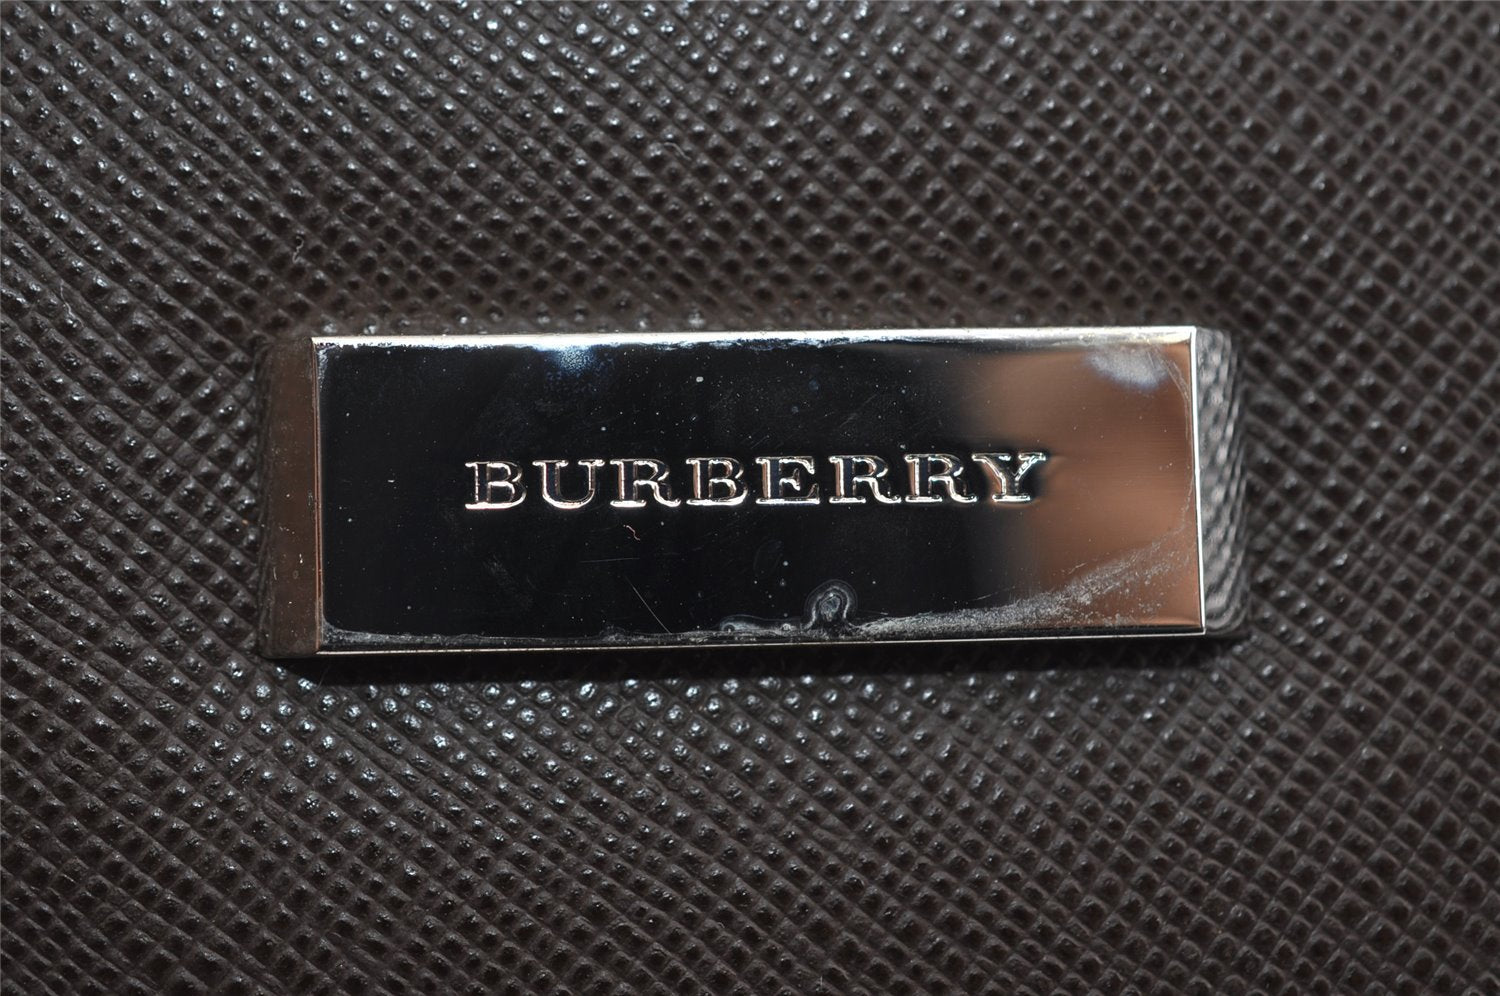 Authentic BURBERRY Vintage Leather Clutch Hand Bag Purse Brown 1177I